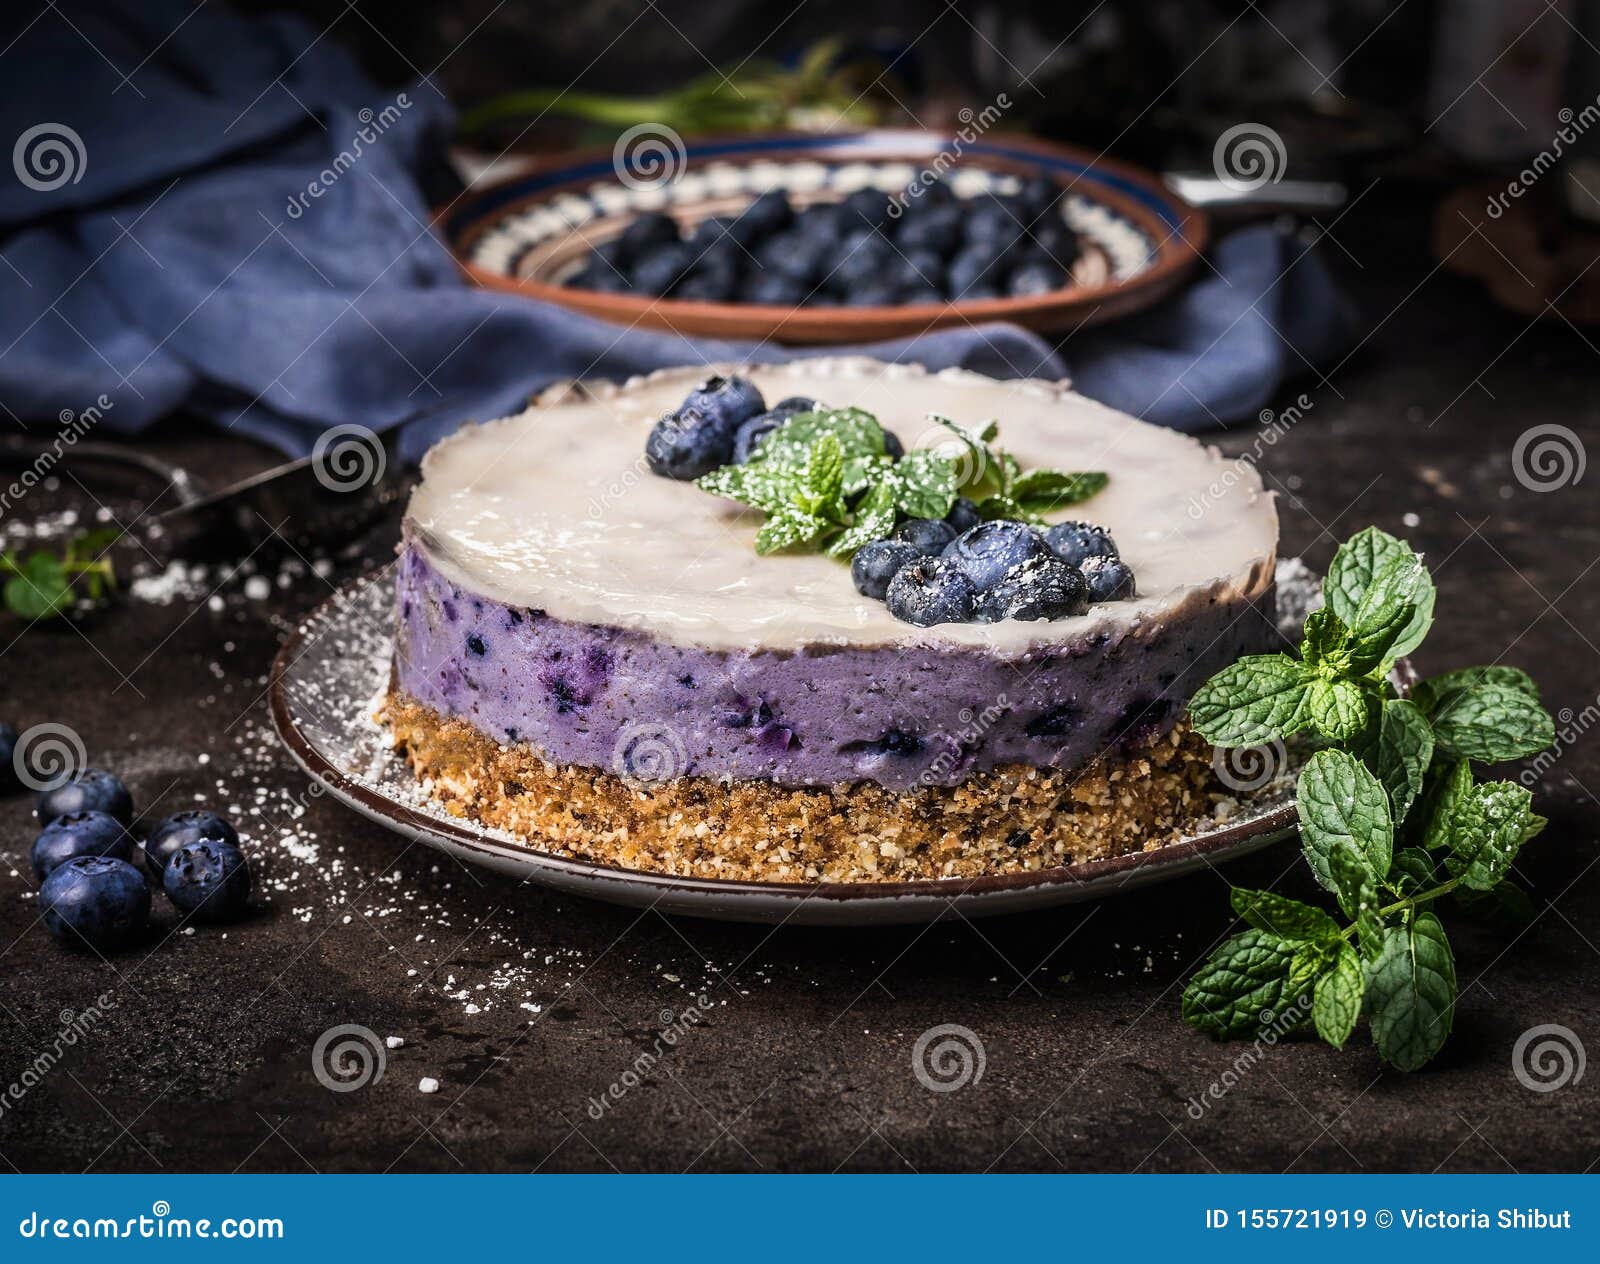 Tasty Purple Blueberry No Bake Cheesecake Decorated with Fresh ...